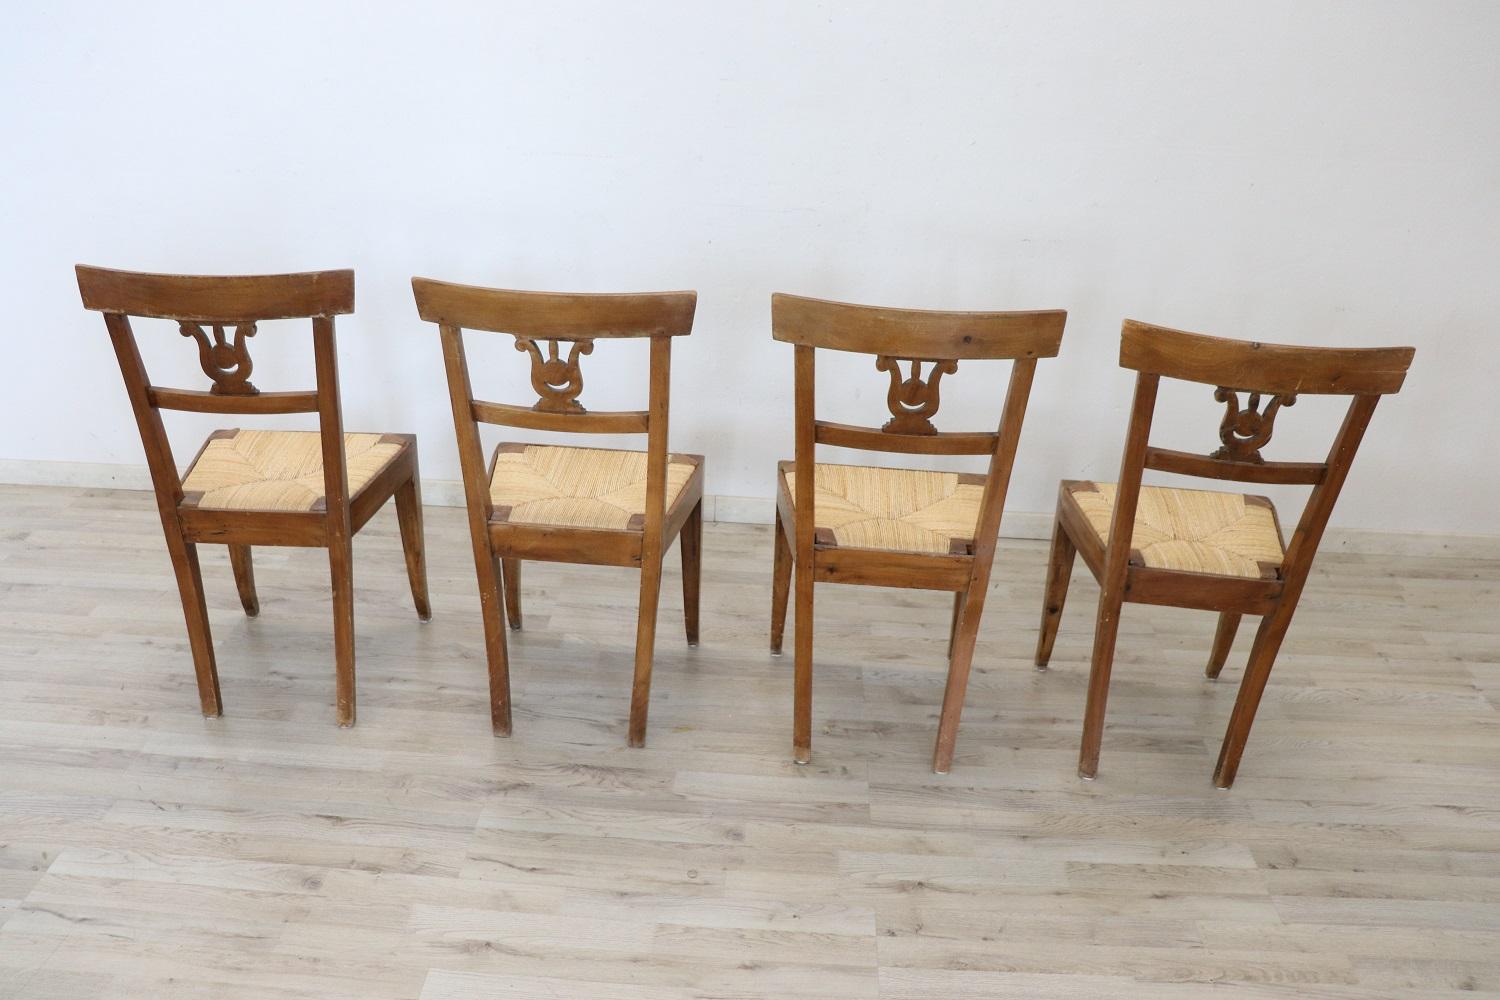 Early 19th Century Italian Empire Carved Walnut Wood Four Antique Chairs For Sale 8